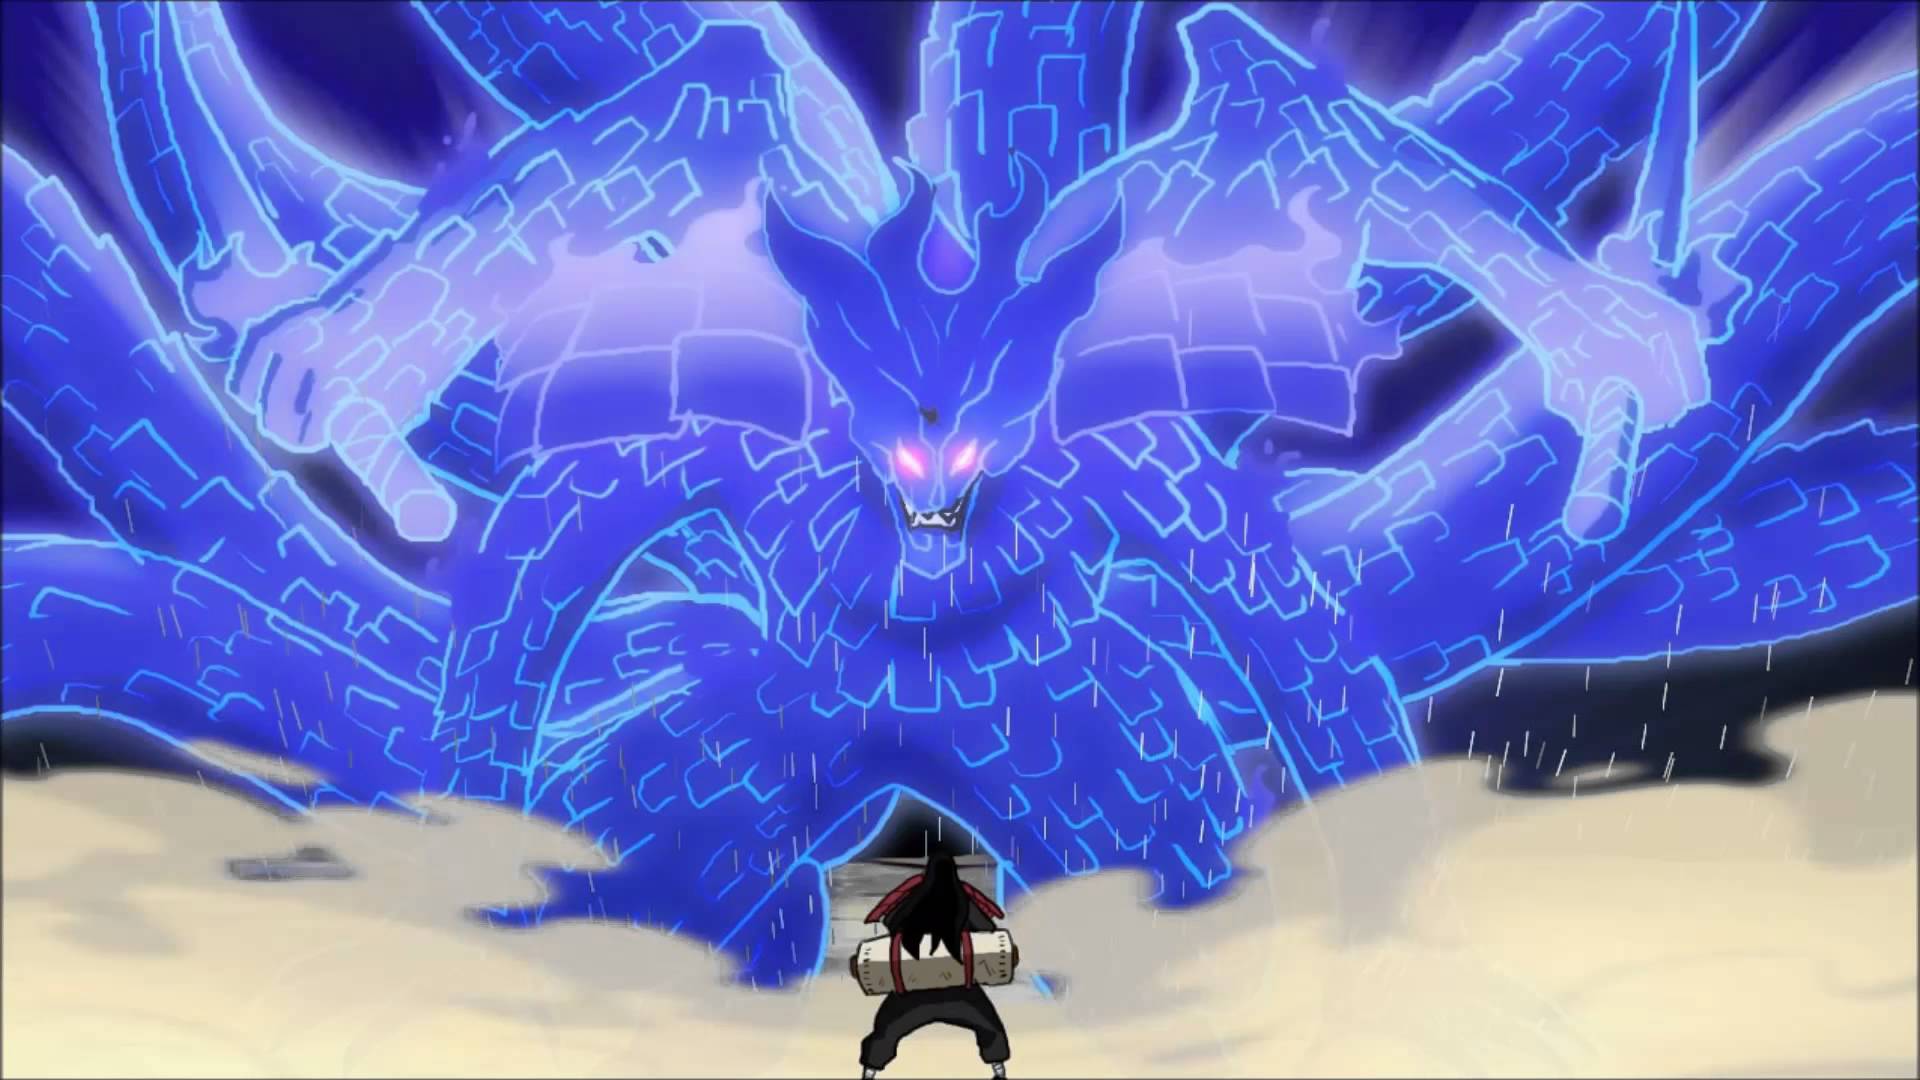 Kyuubi Susanoo Wallpapers Hd Wallpaper Cave See more ideas about anime naruto download wallpaper 720x1280 madara uchiha, uchiha madara, naruto anime, naruto, madara for pc. kyuubi susanoo wallpapers hd